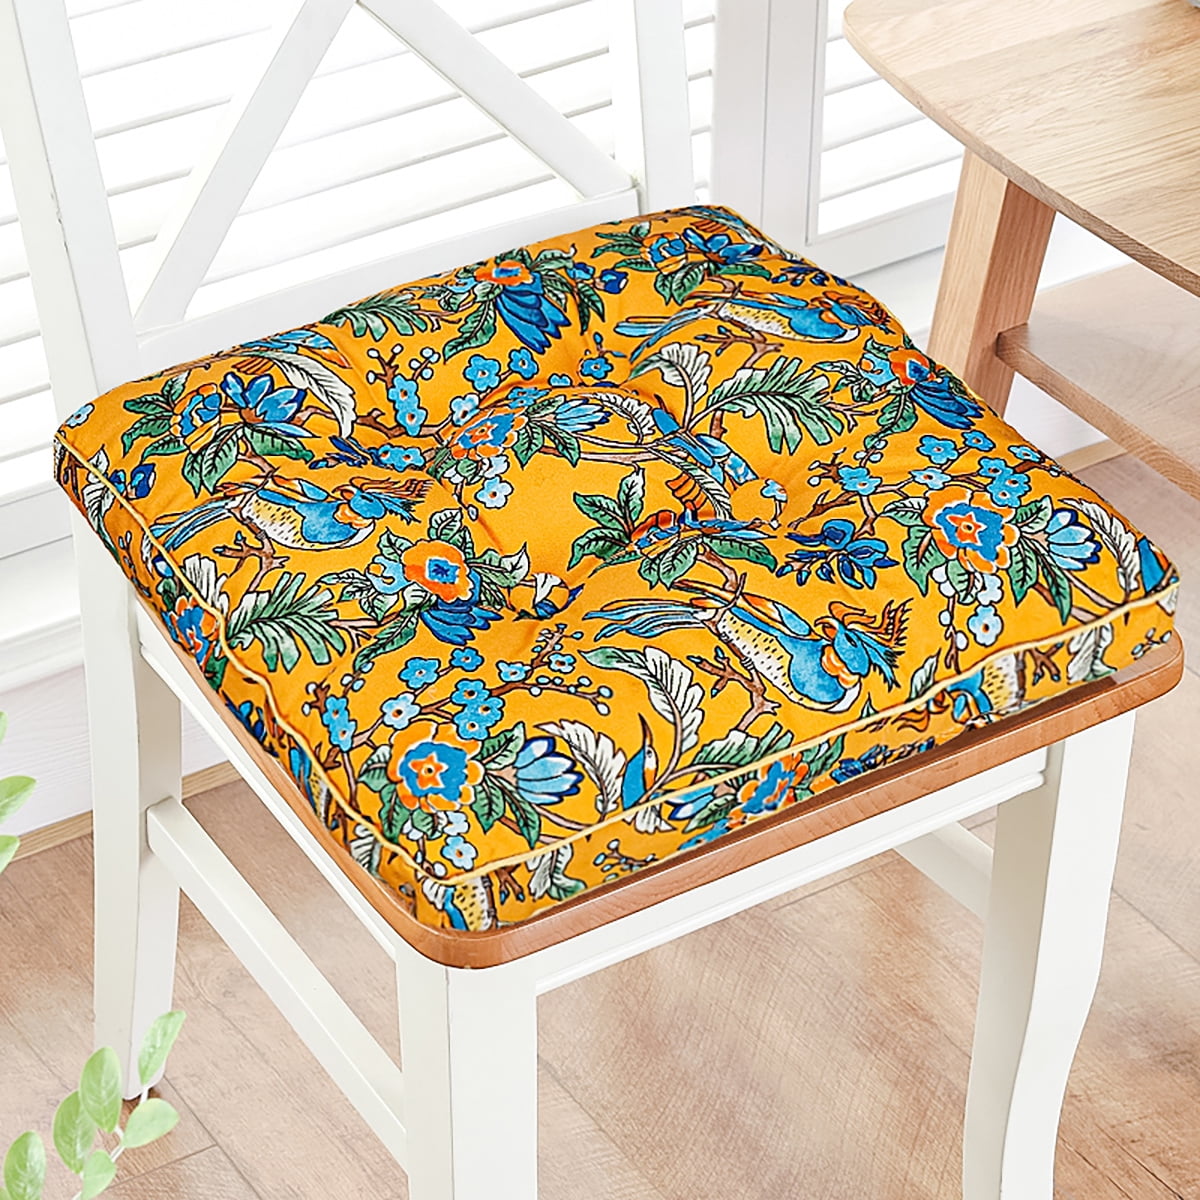 Home Dining Seat Pads Cushion Chair Garden Patio Kitchen Office Indoor